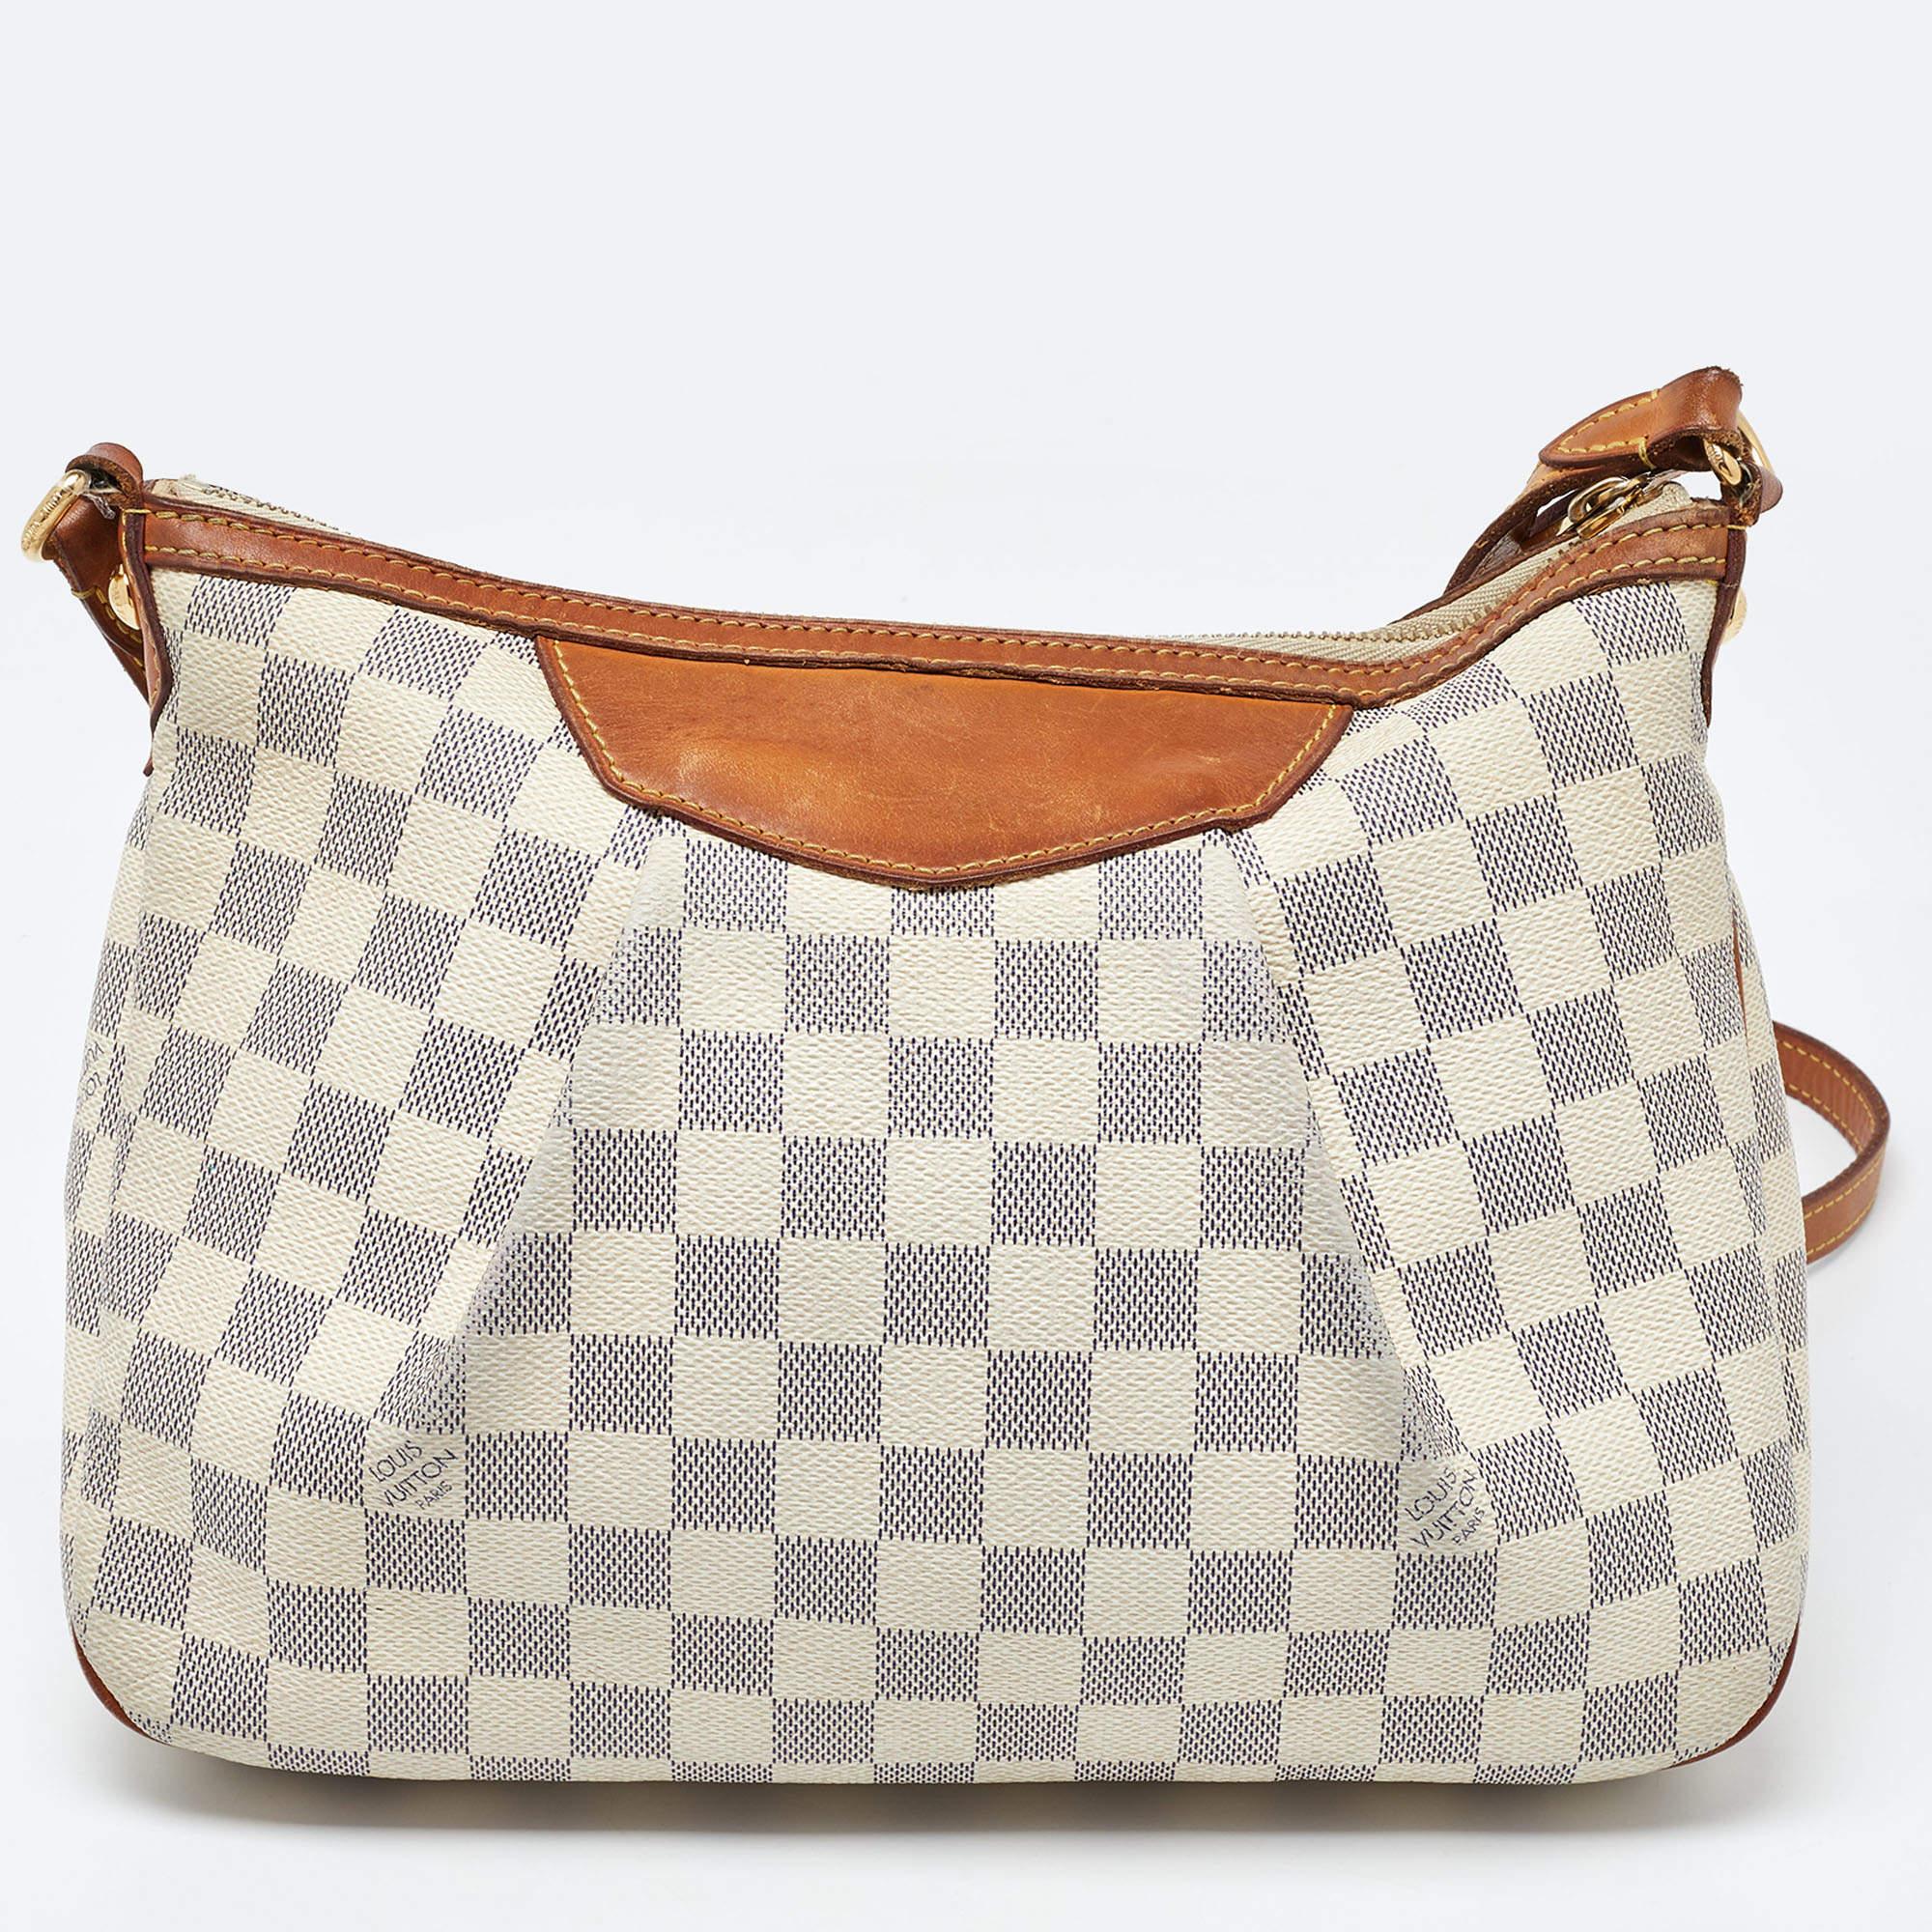 Like every other Louis Vuitton creation, this Siracusa bag also promises high quality and a timeless style. Crafted from signature Damier Azur canvas, the bag is fixed with a leather shoulder strap. The canvas-lined interior is sized to hold your